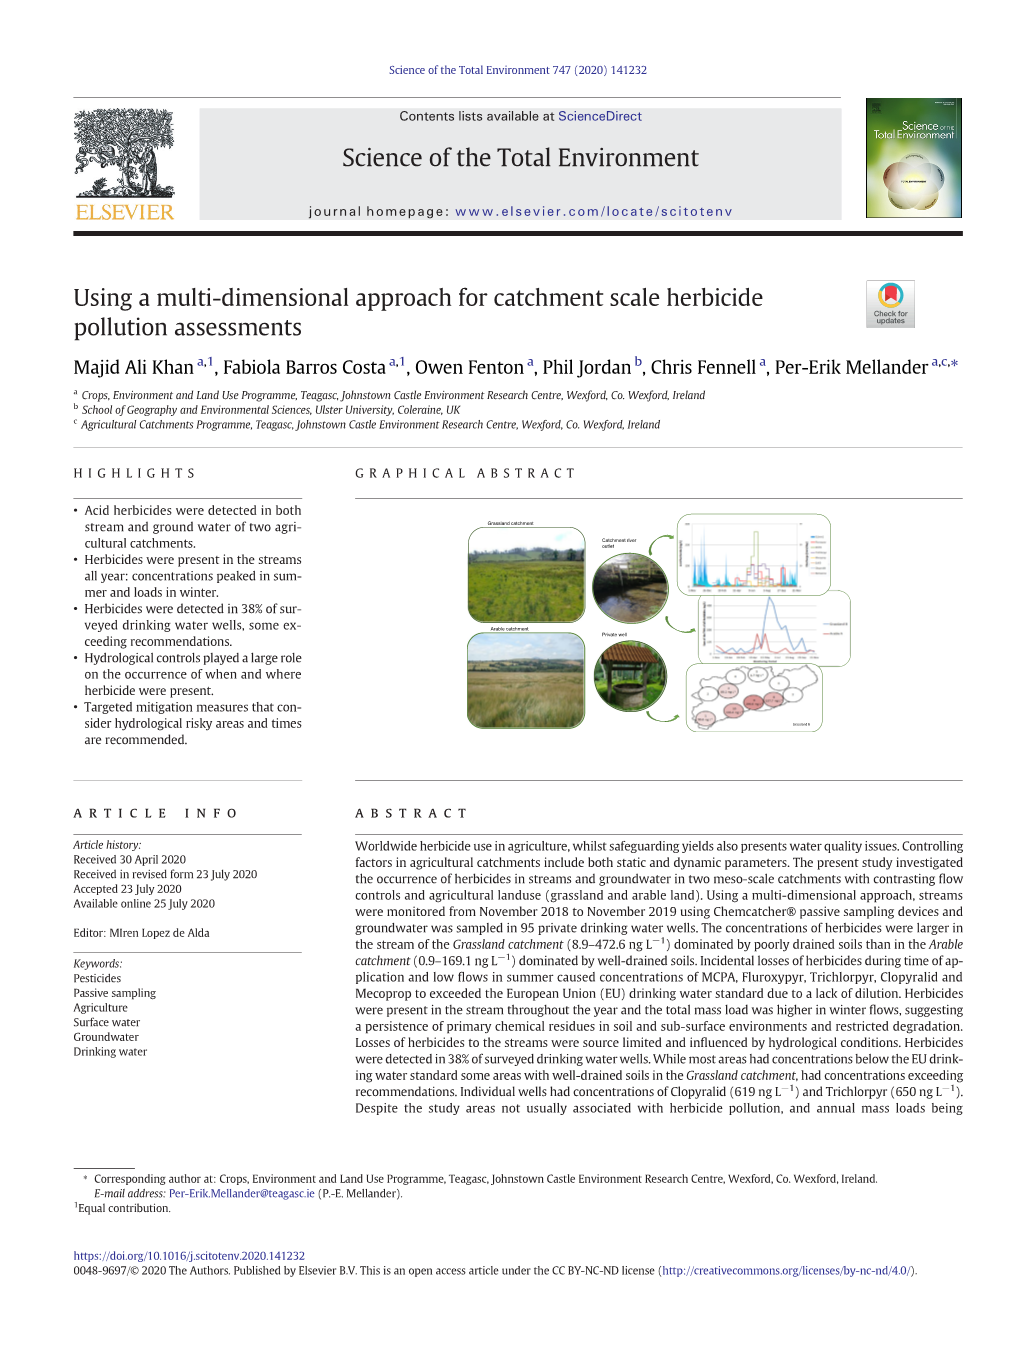 Using a Multi-Dimensional Approach for Catchment Scale Herbicide Pollution Assessments